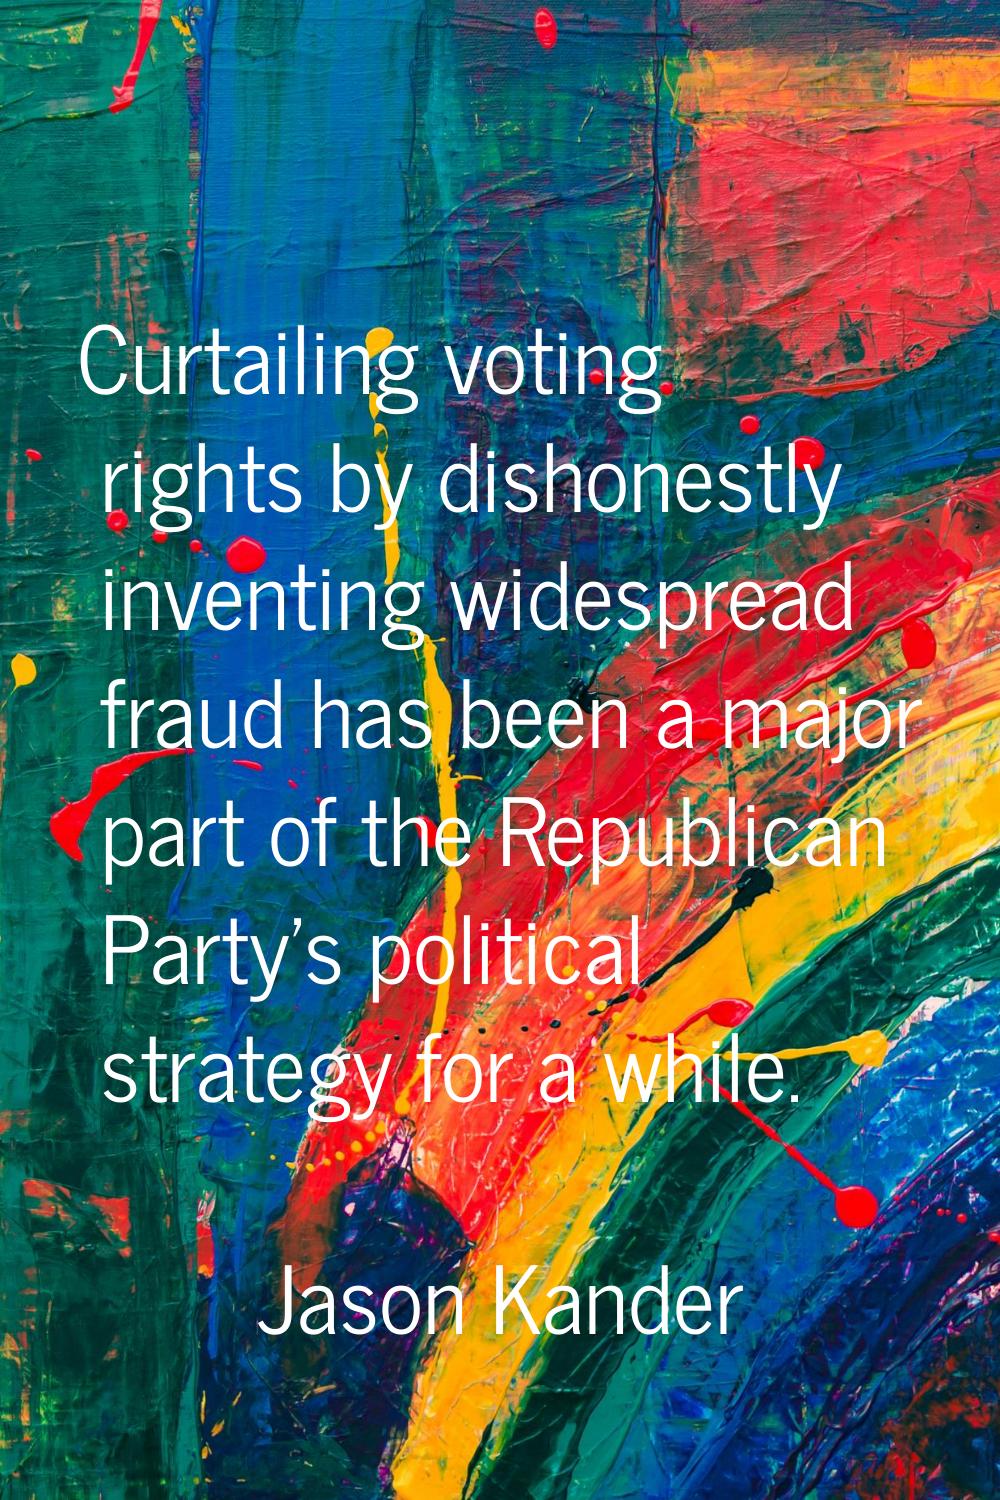 Curtailing voting rights by dishonestly inventing widespread fraud has been a major part of the Rep